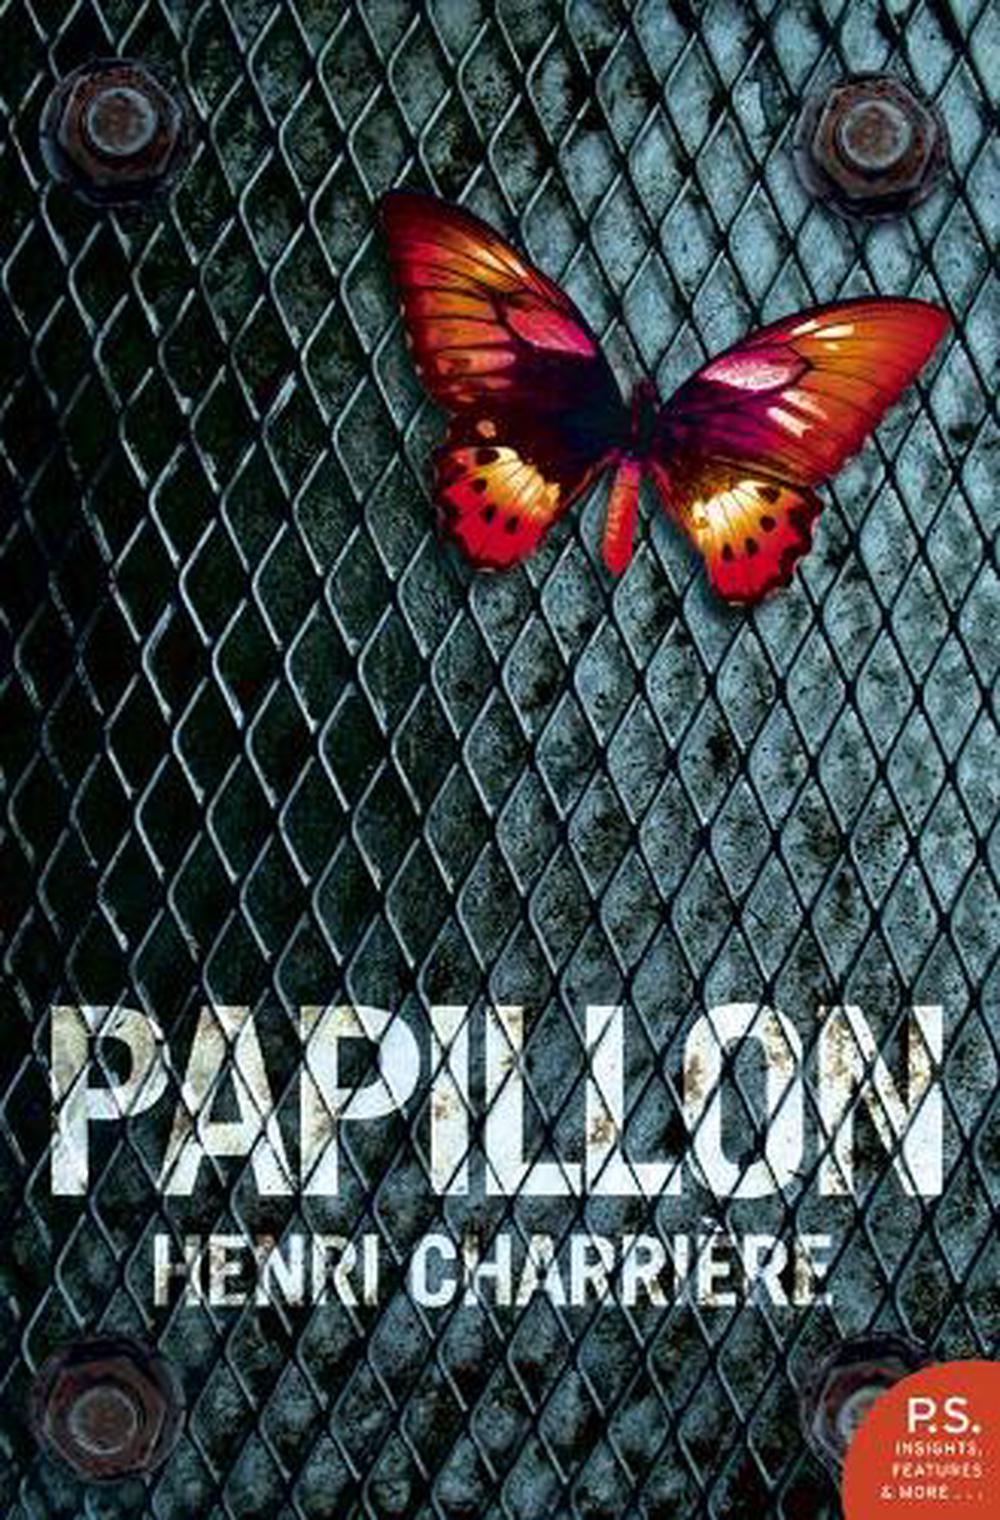 Papillon By Henri Charrière Paperback 9780007179961 Buy Online At The Nile